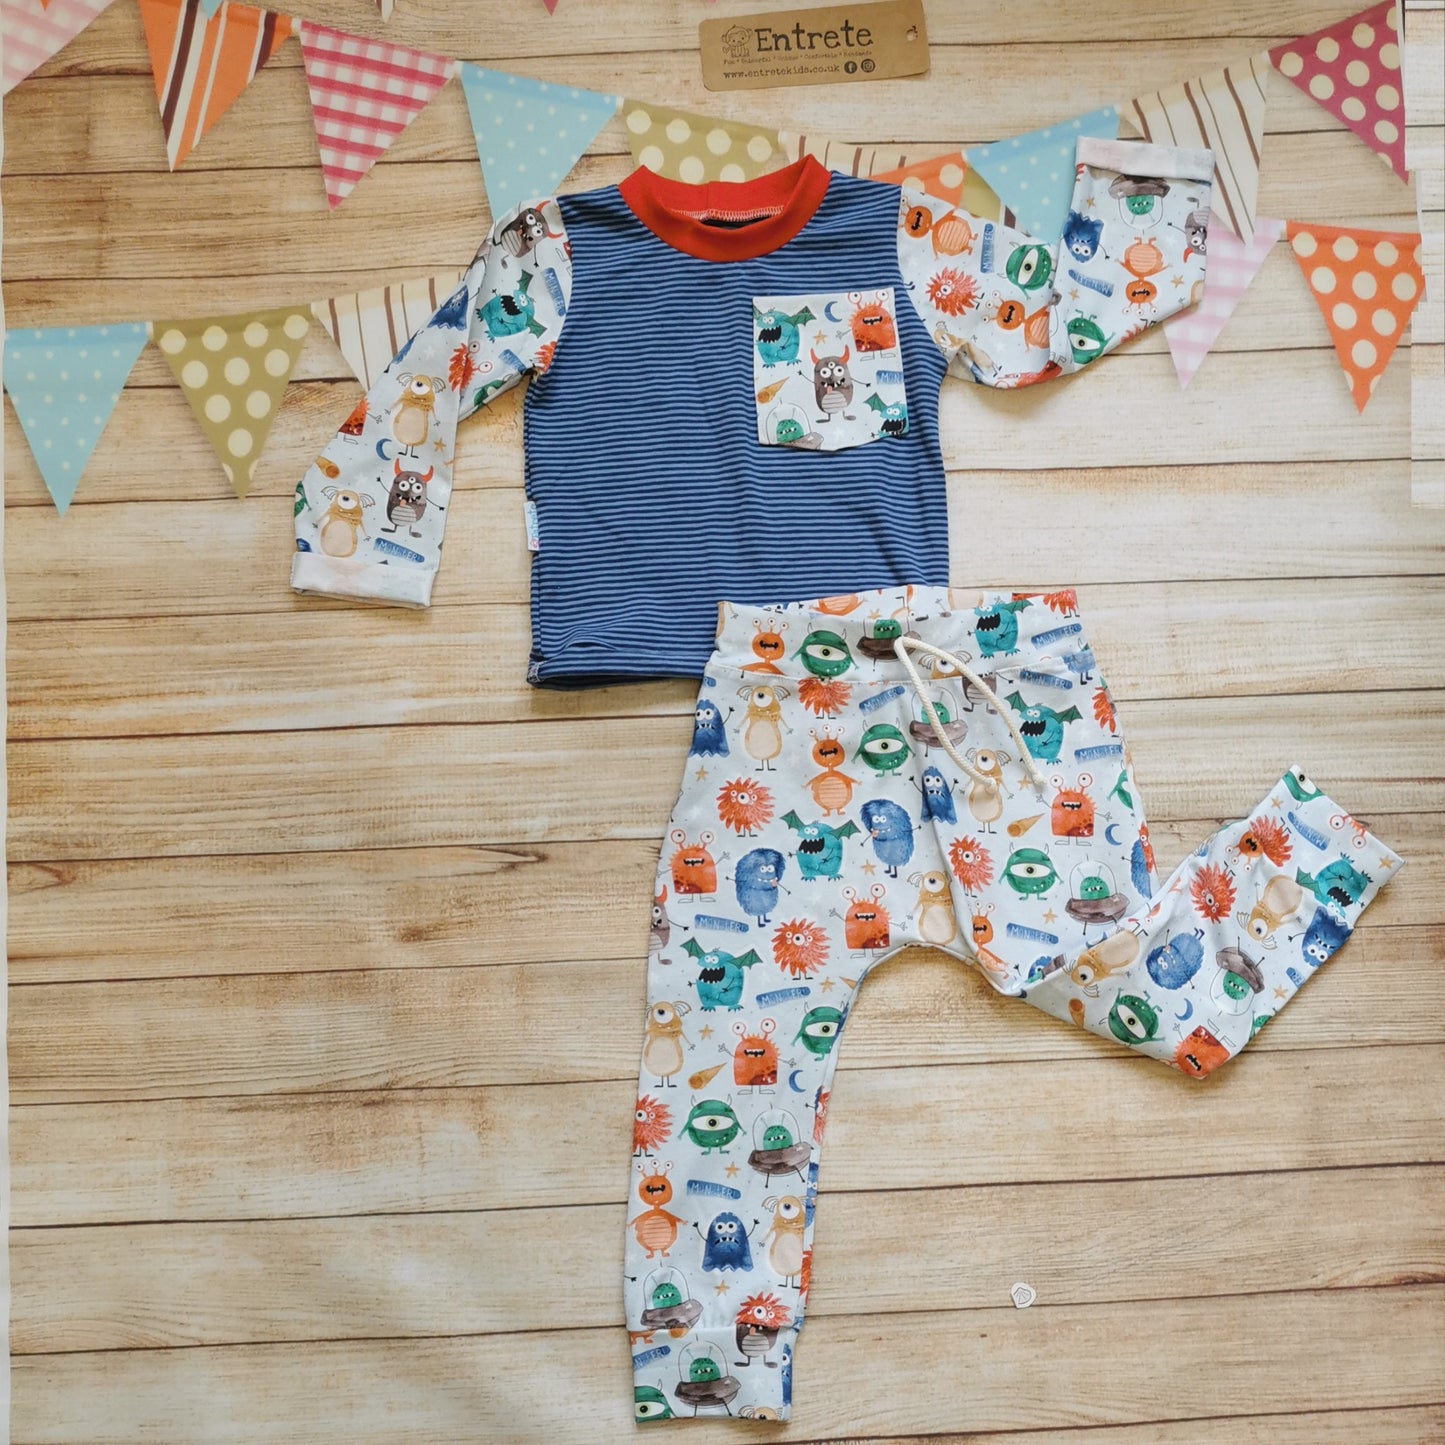 Fun and colourful monsters & navy striped long sleeve t-shirt shown with matching pale blue monster joggers (sold separately). Handmade using pale blue organic monsters cotton jersey on navy striped cotton jersey. With red cotton ribbing neck.